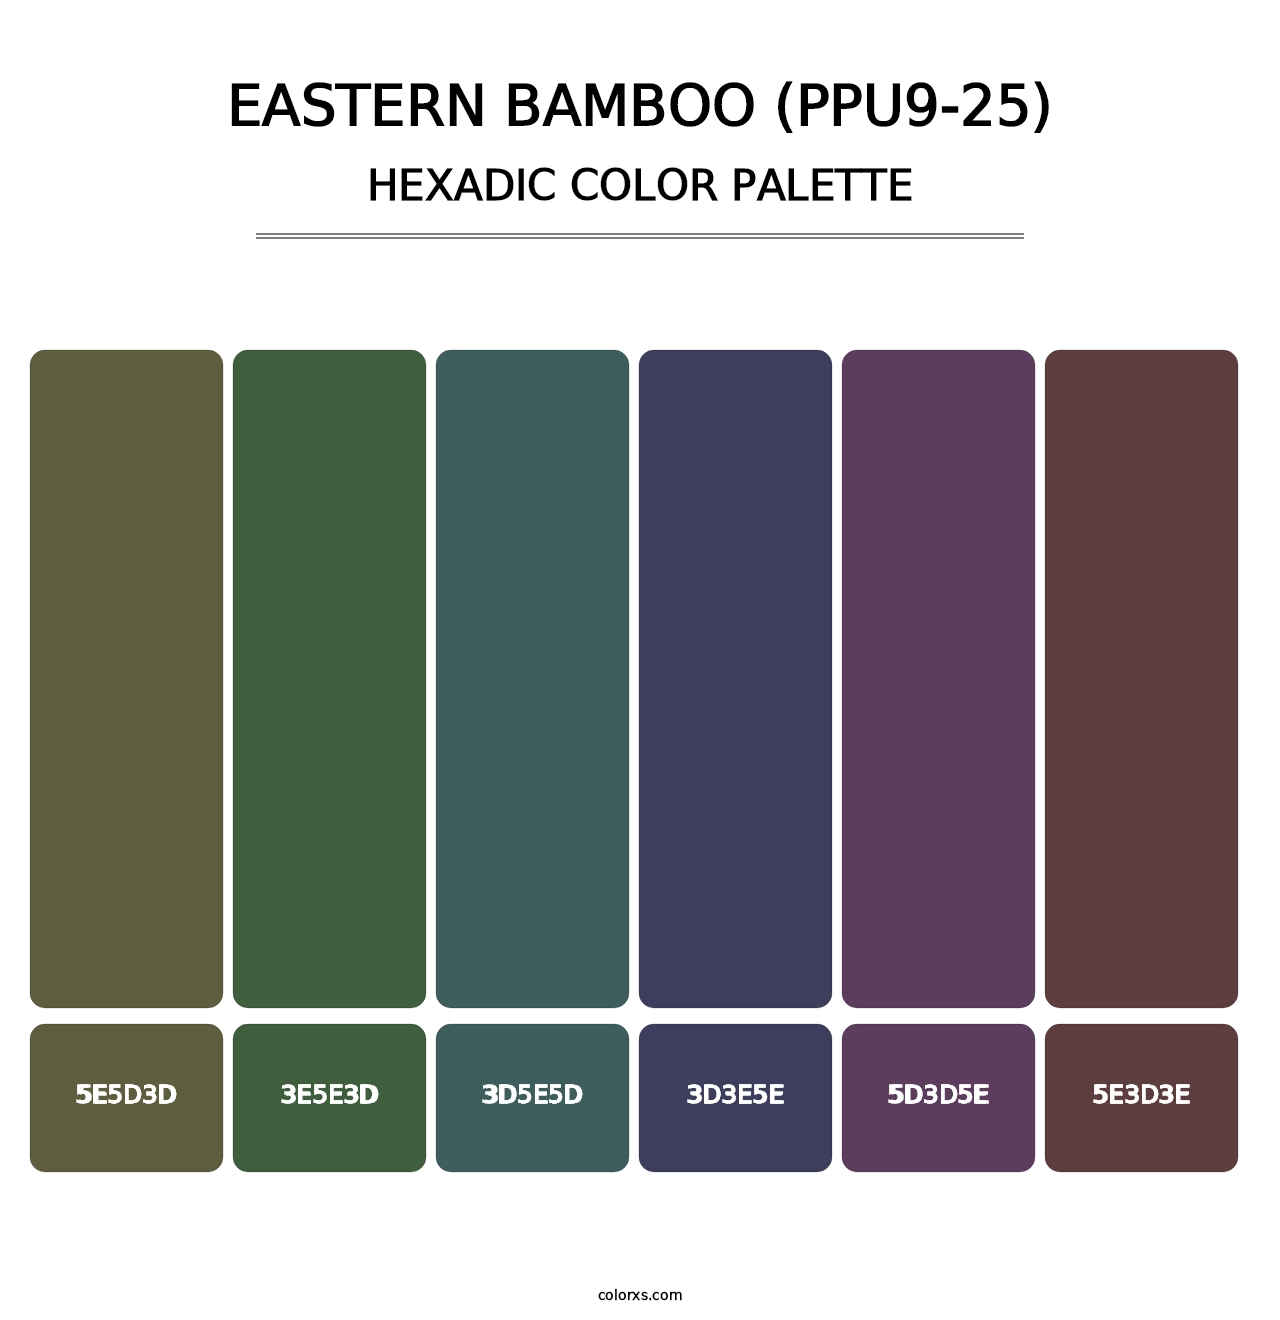 Eastern Bamboo (PPU9-25) - Hexadic Color Palette